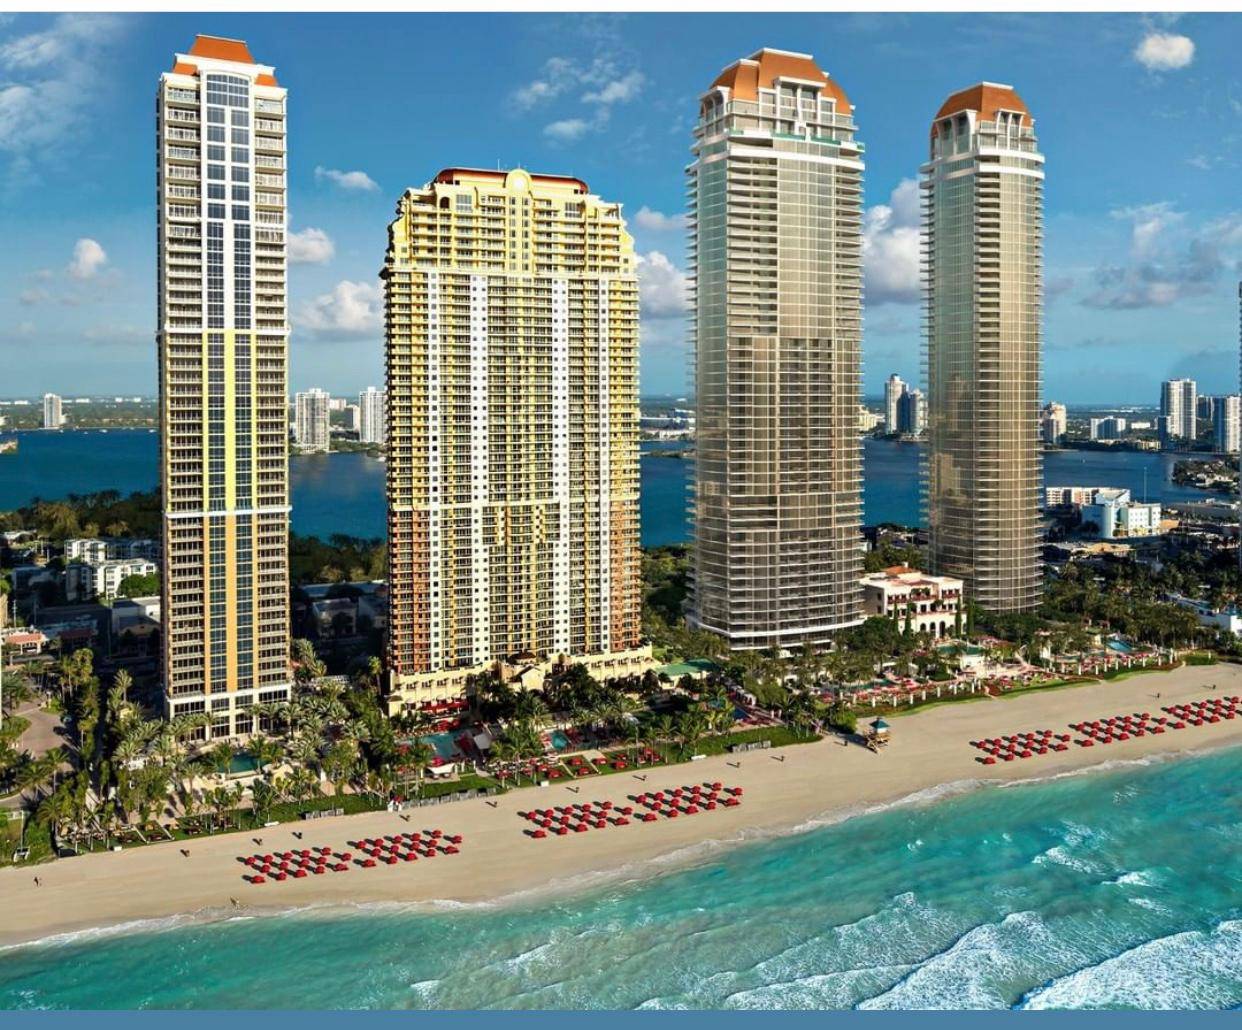 Exquisite Ocean Front 4BR/4BA w/Terrace, The Estates At Acqualina, World's Finest Residences, Sunny Isles